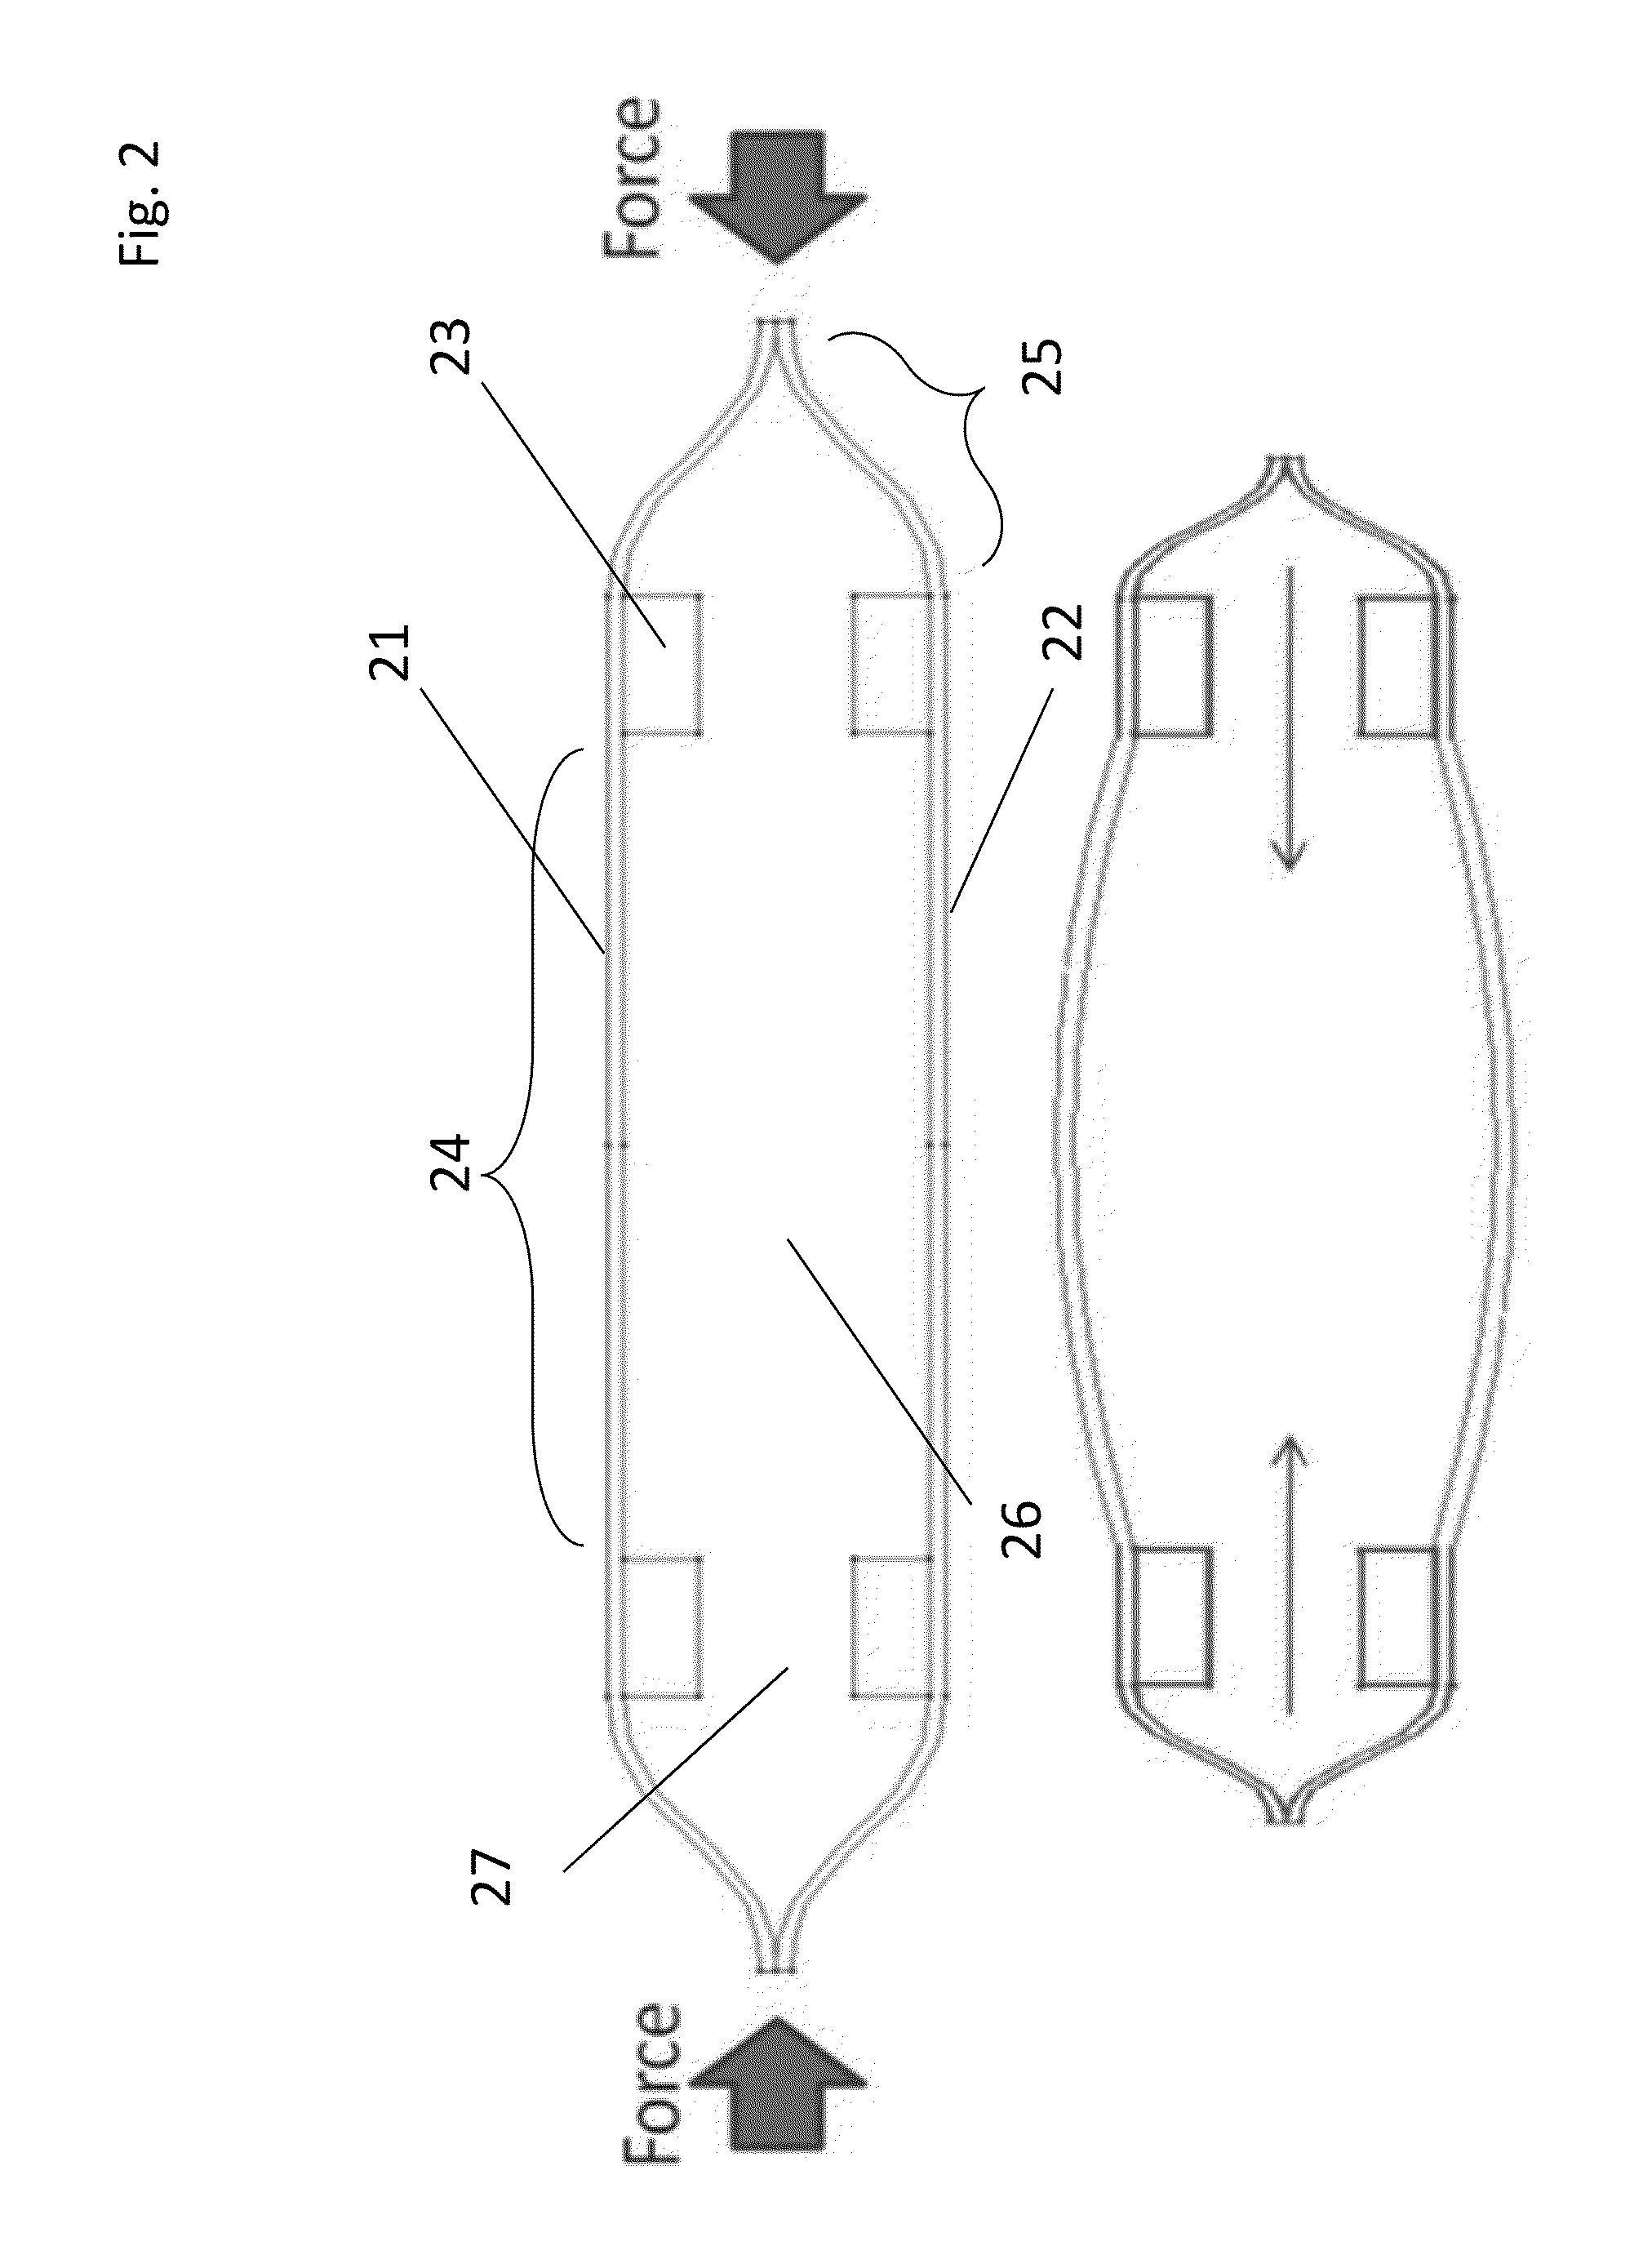 Fluidic intraocular lens systems and methods